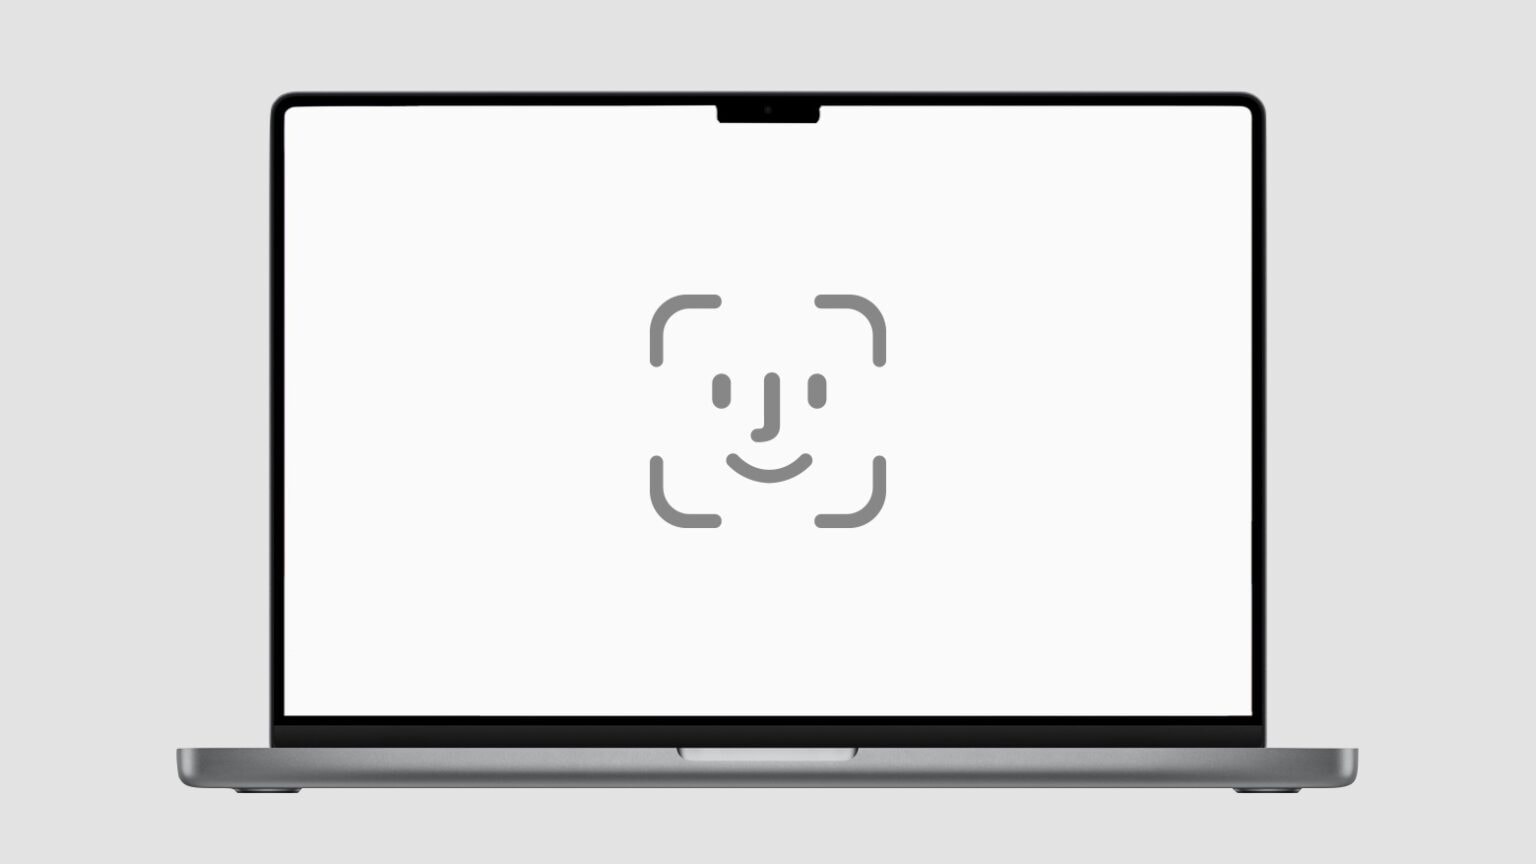 No Face ID in MacBook Pro is a missed opportunity